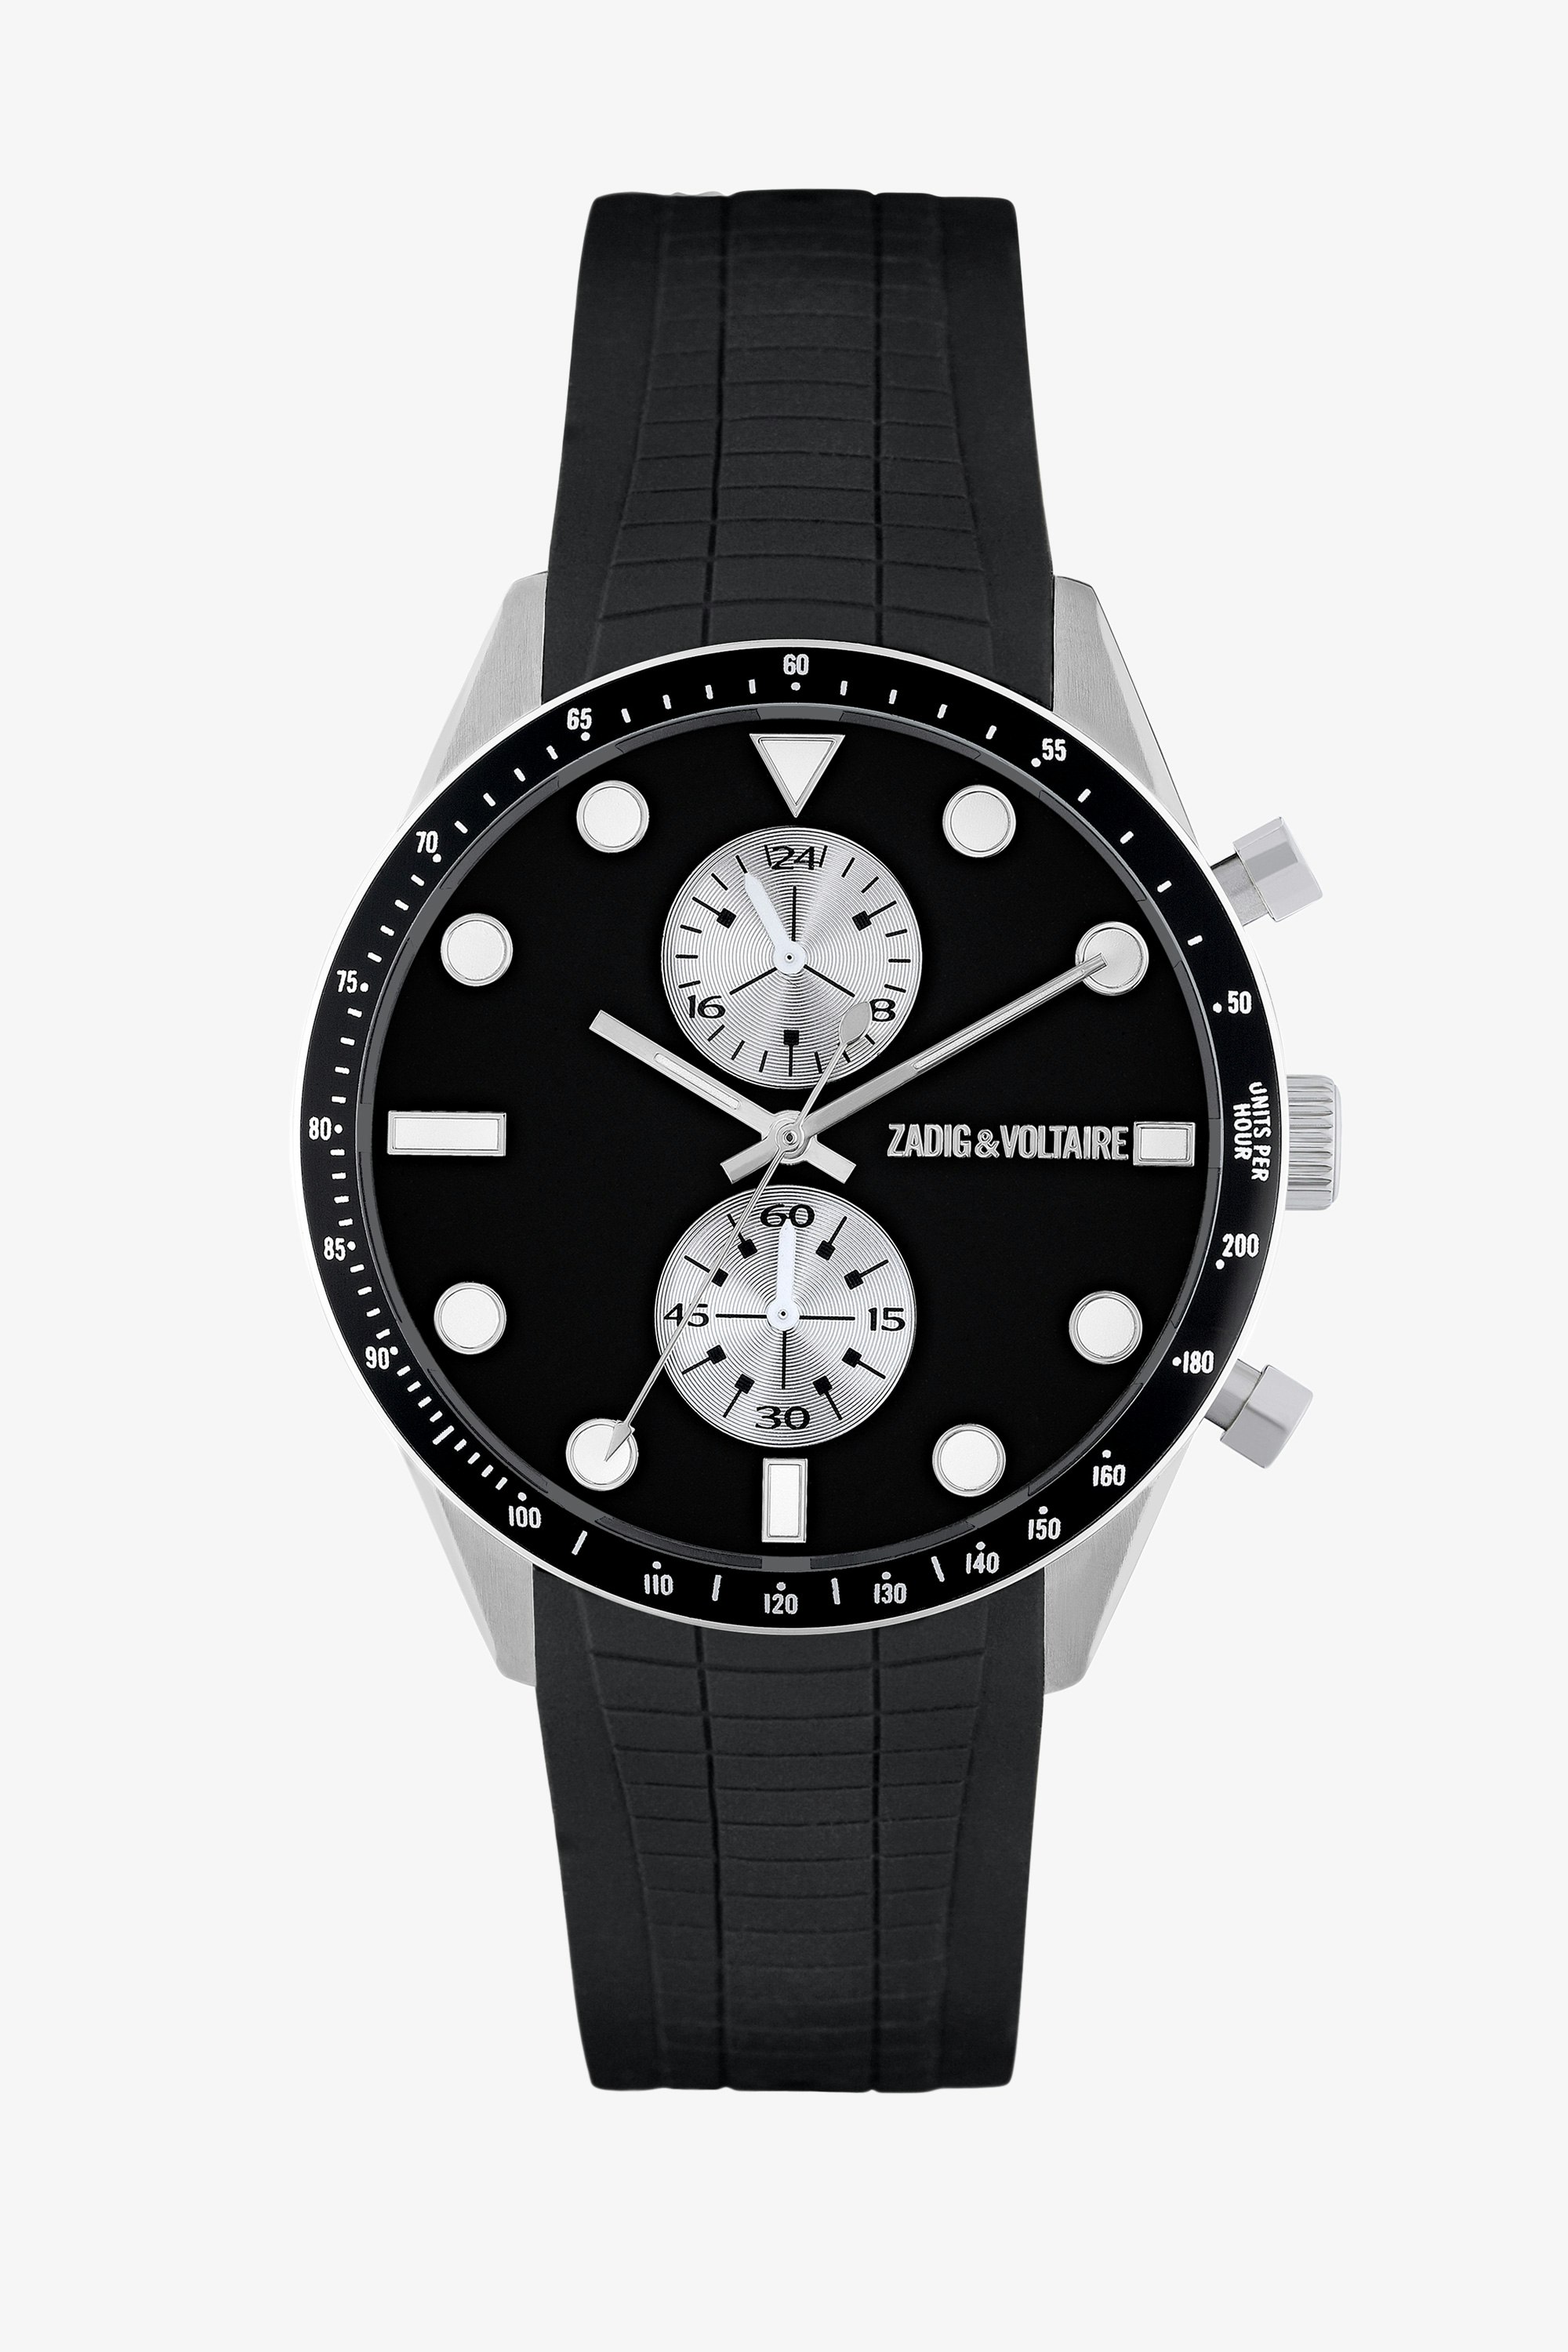 Master Watch with Silicone Strap Men’s silver-tone steel watch with black dial and black silicone strap